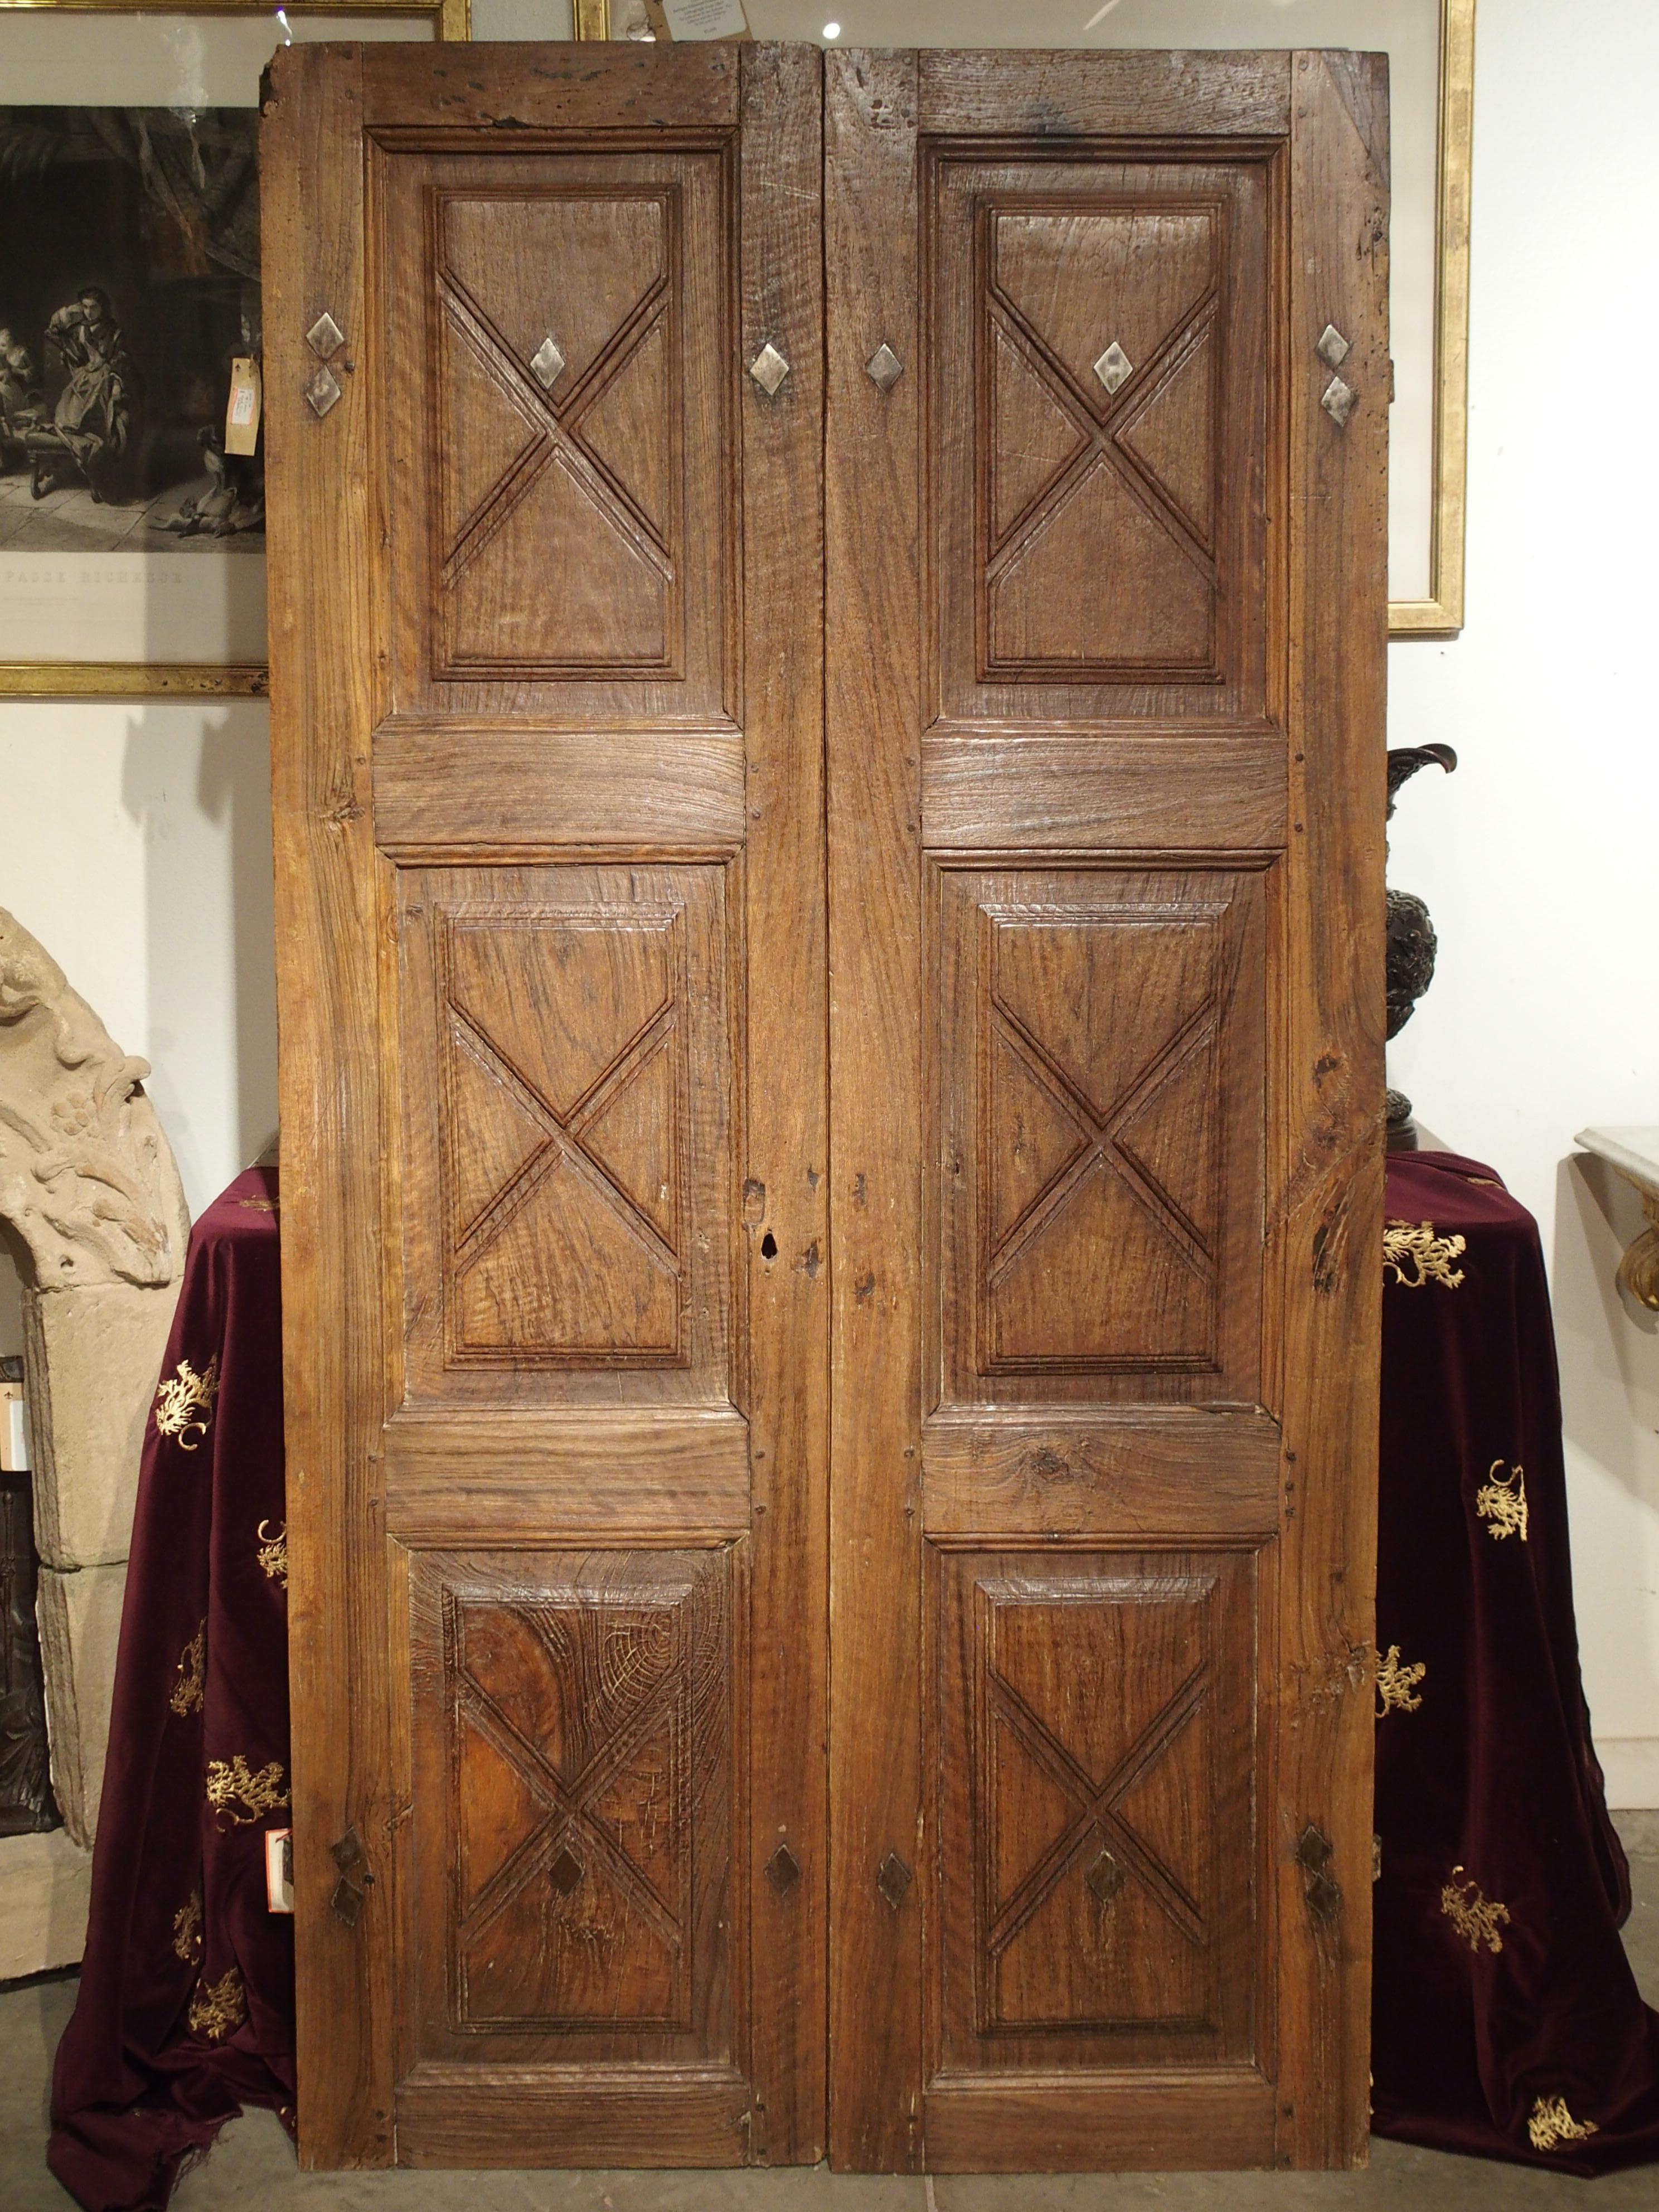 Hand-Carved Pair of circa 1700 Doors from the Piedmont Region of Italy